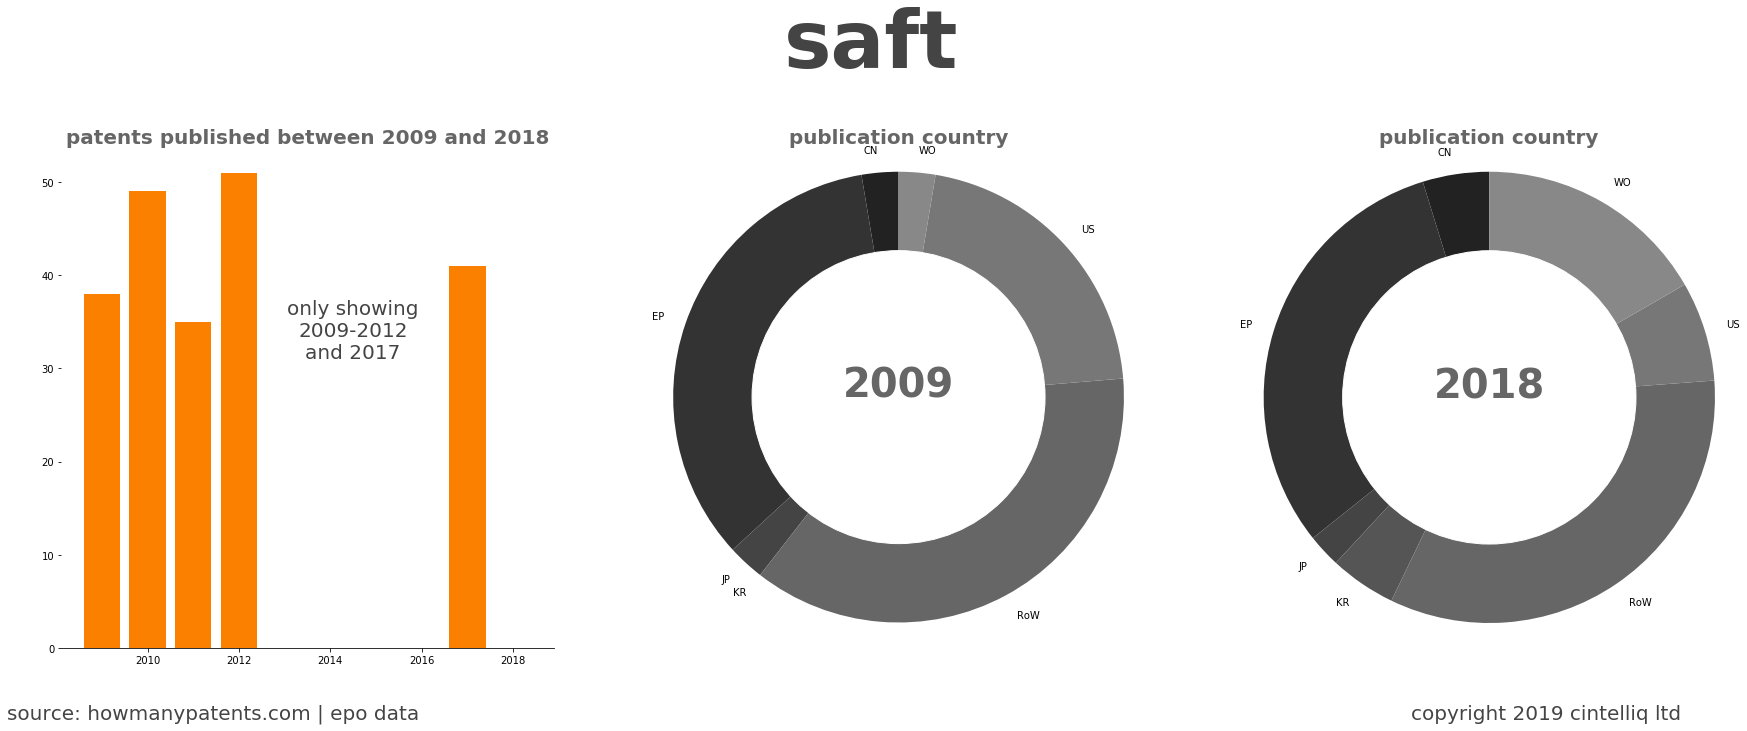 summary of patents for Saft